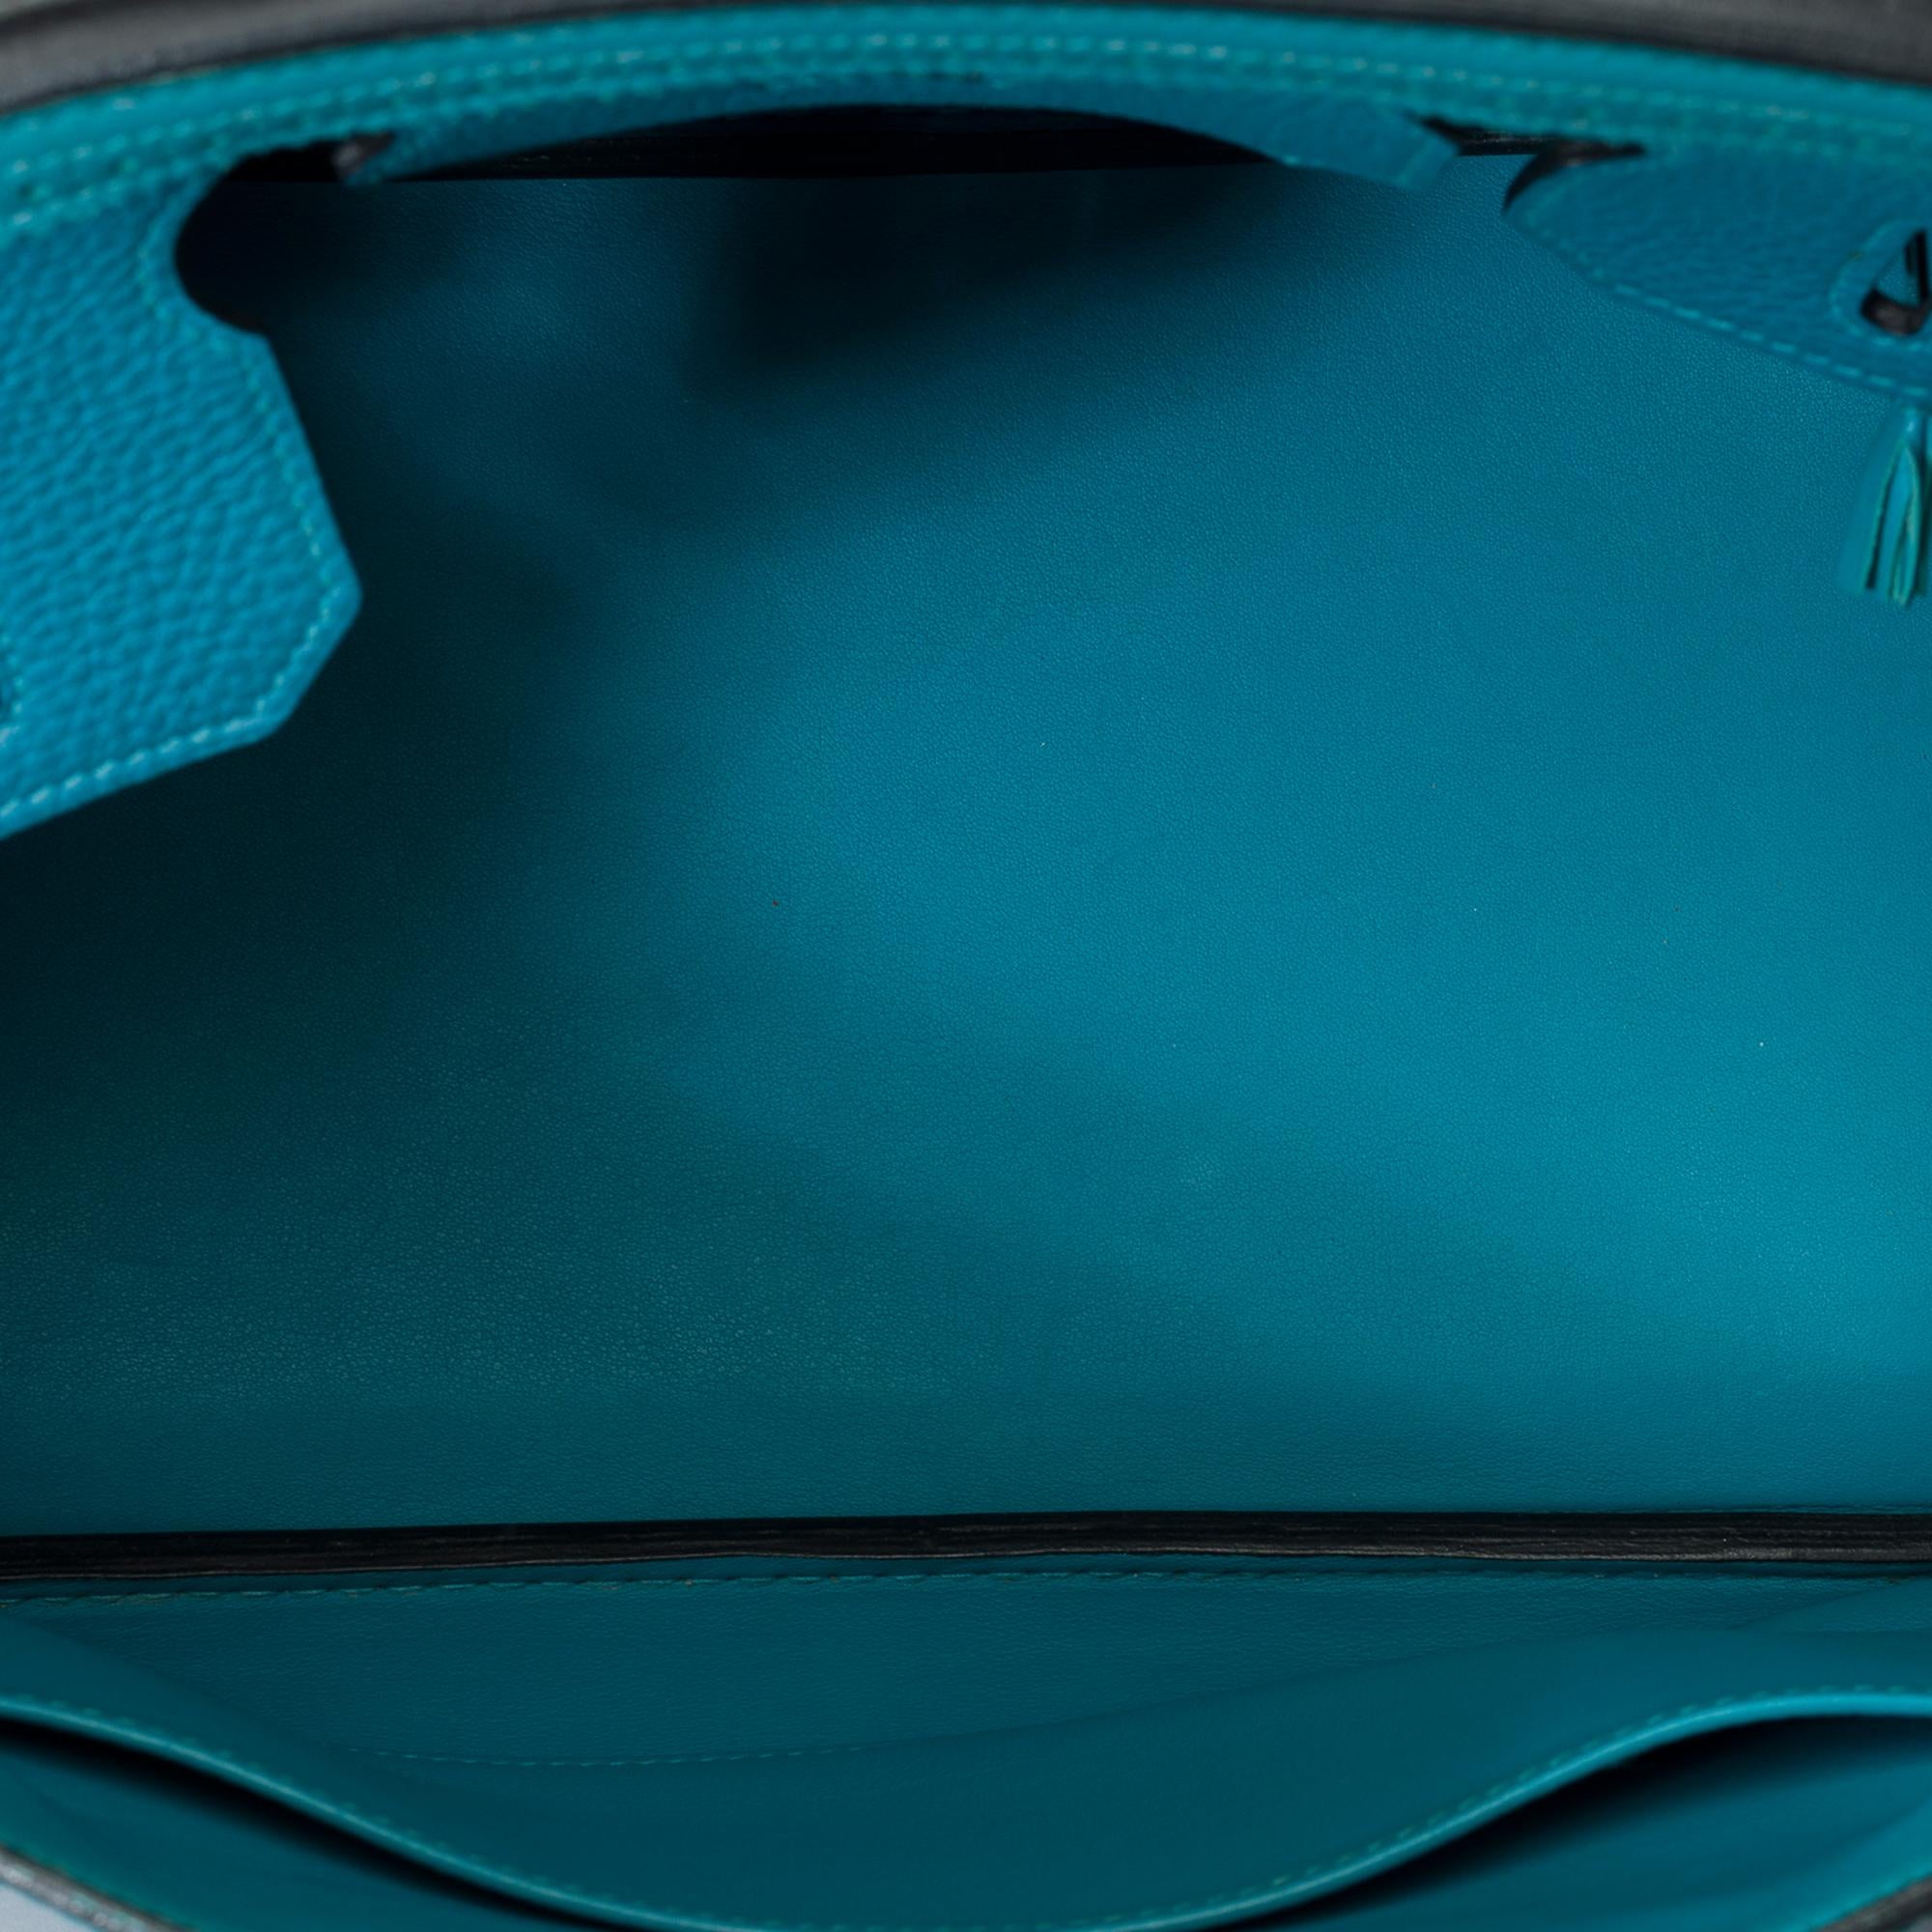 Ghillies Limited Edition Hermes Birkin 30 handbag in Turquoise Blue leather, SHW For Sale 6